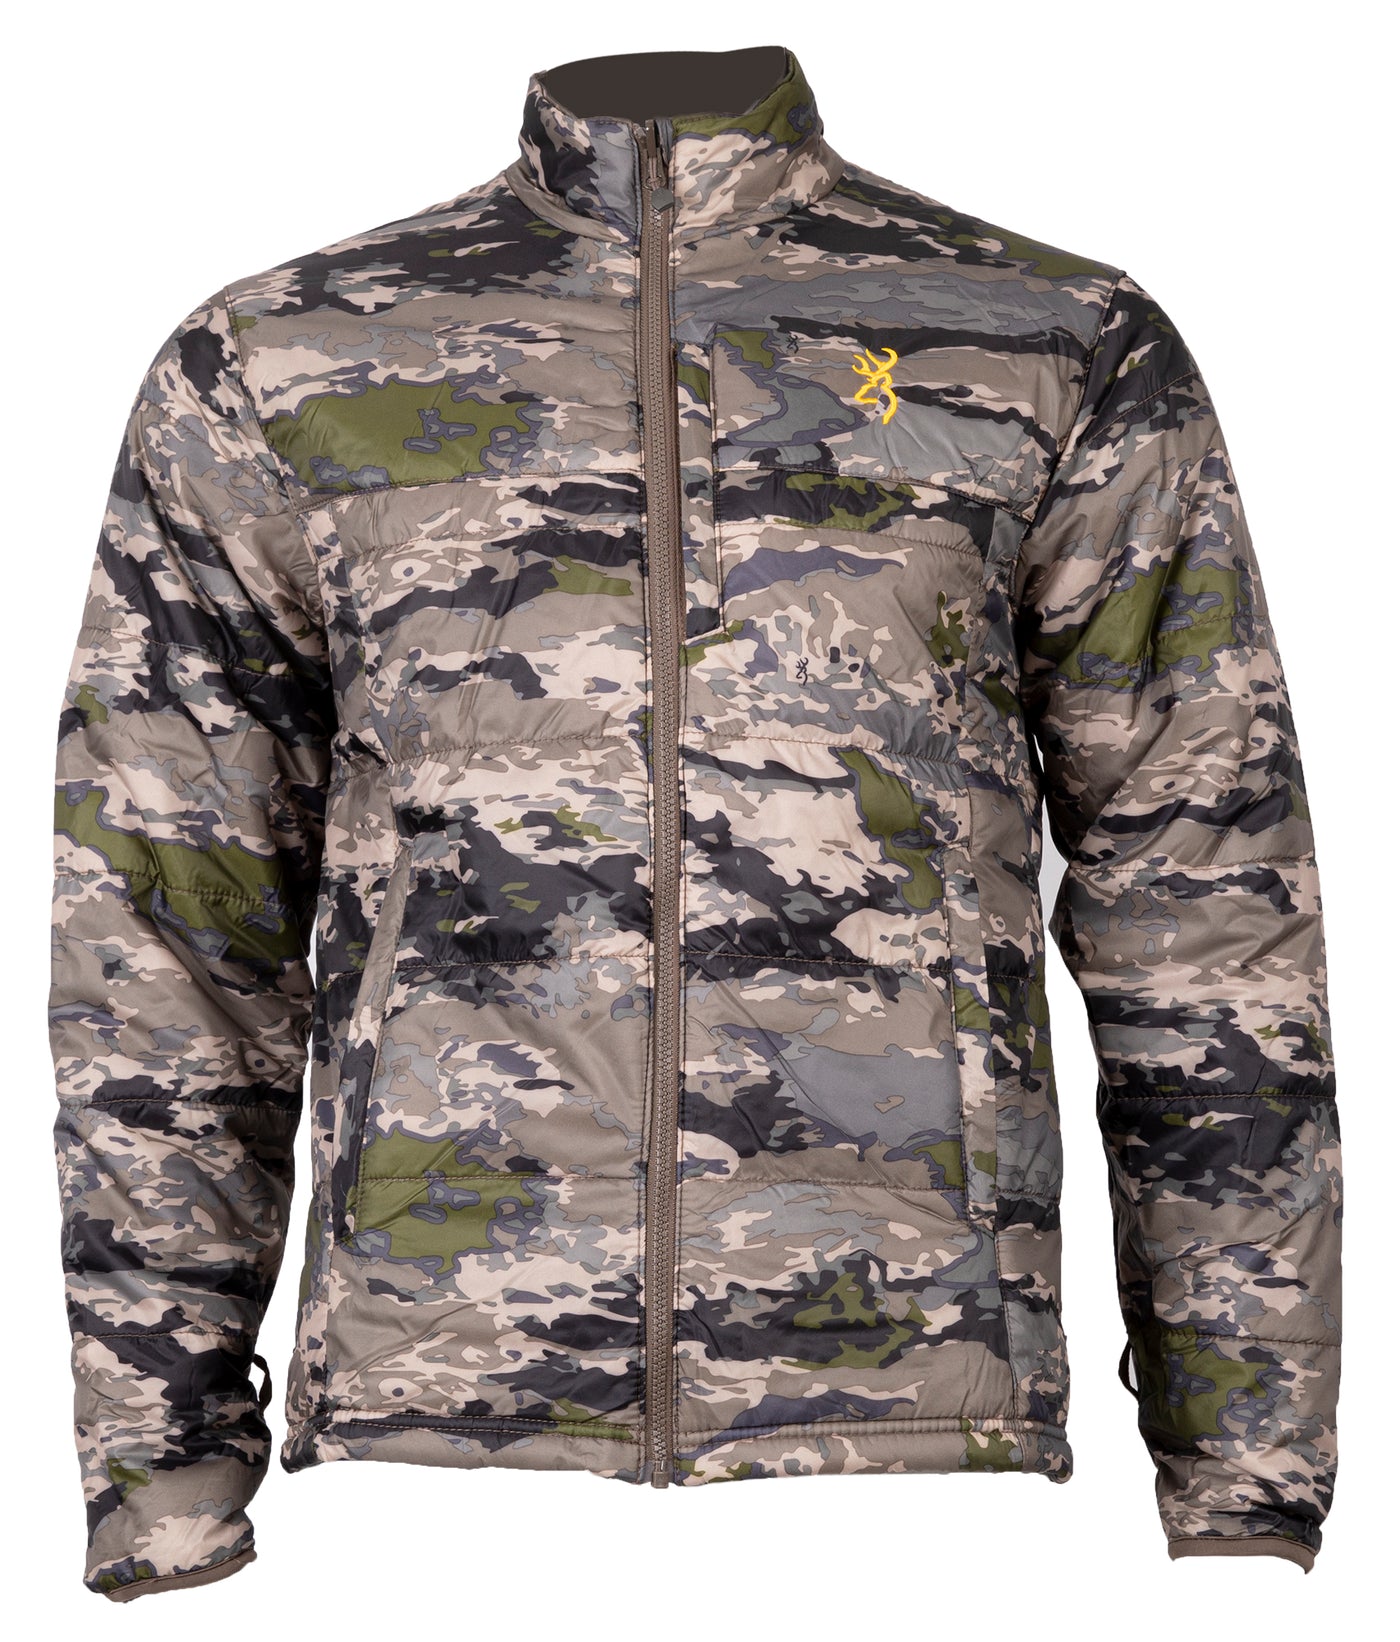 Men's "3 in 1" hunting parka, Ovix camo by Browning